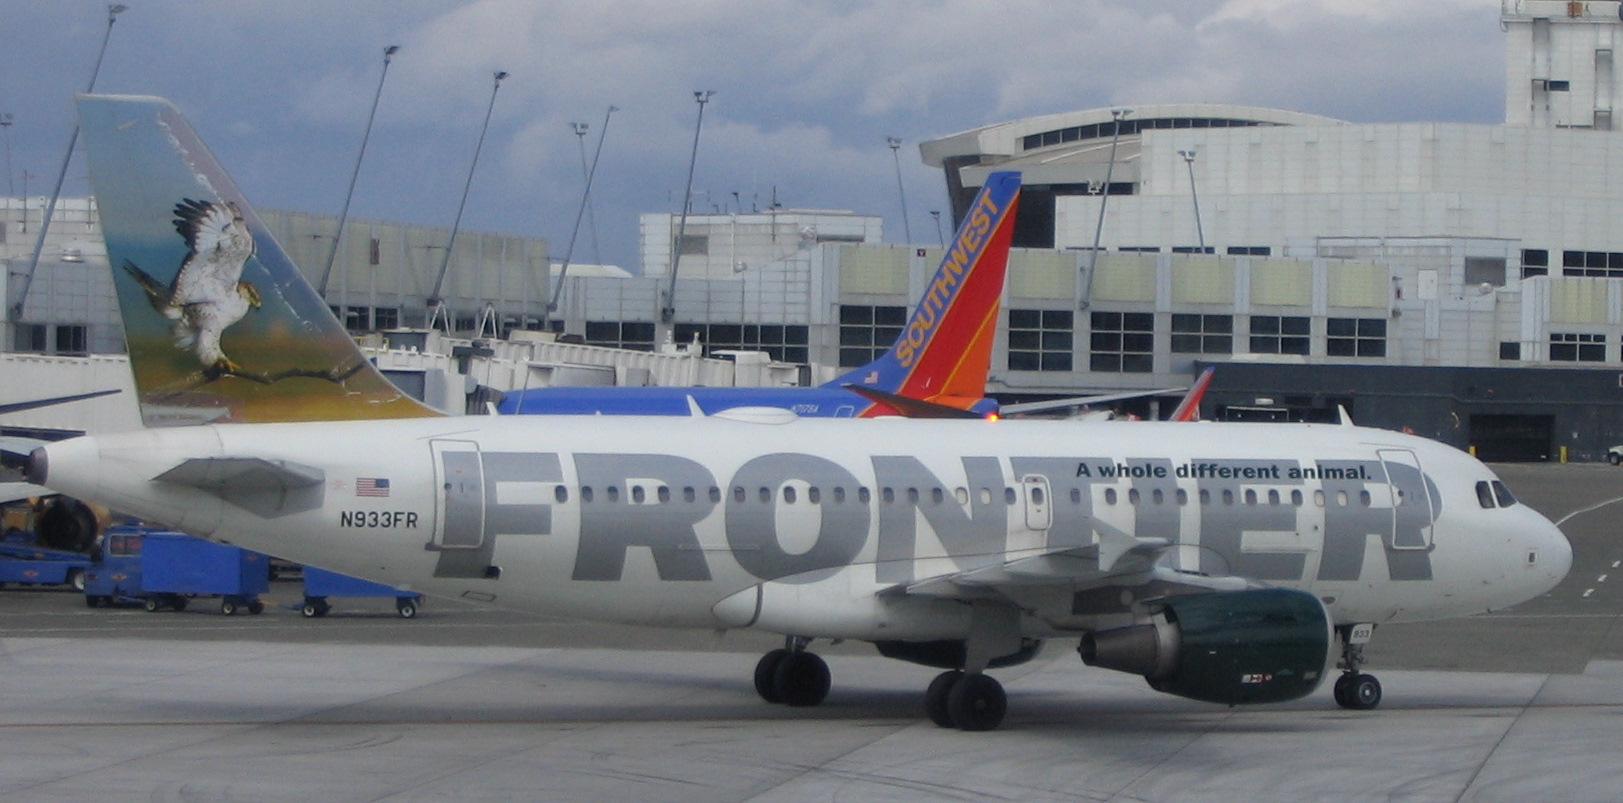 BREAKING: Newest Ebola patient flew Frontier Airlines 2 days ago